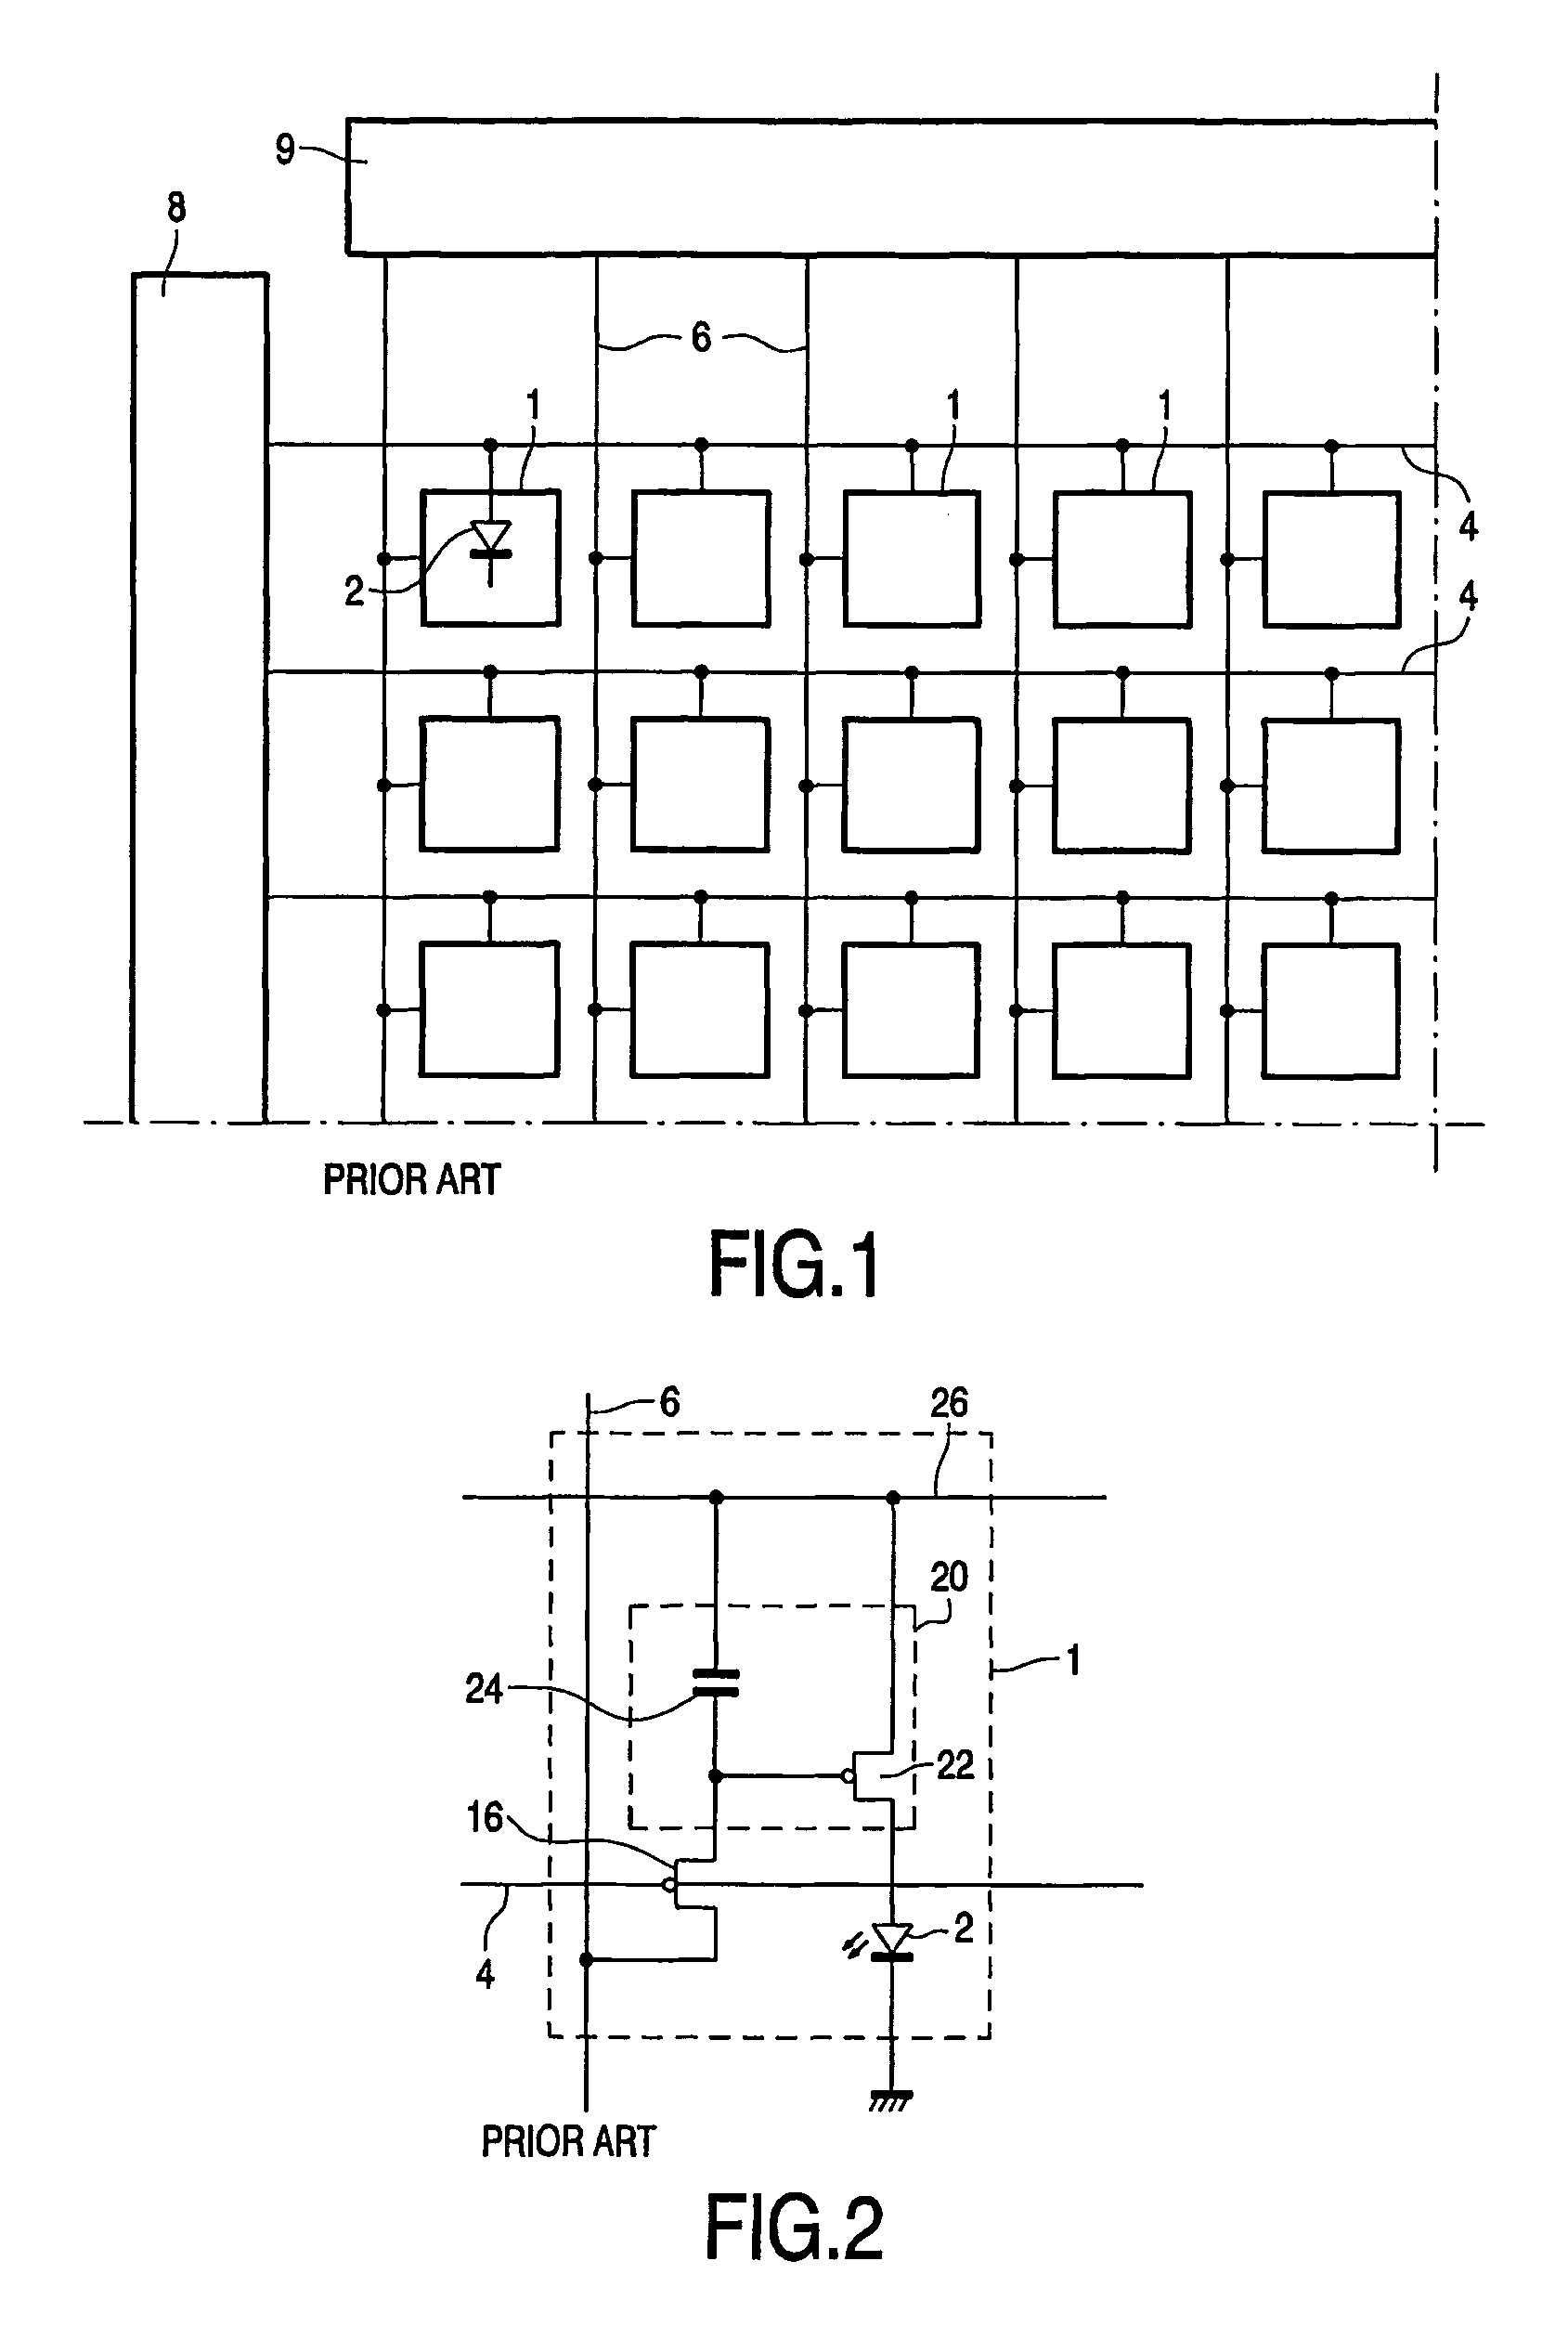 Electroluminescent display devices